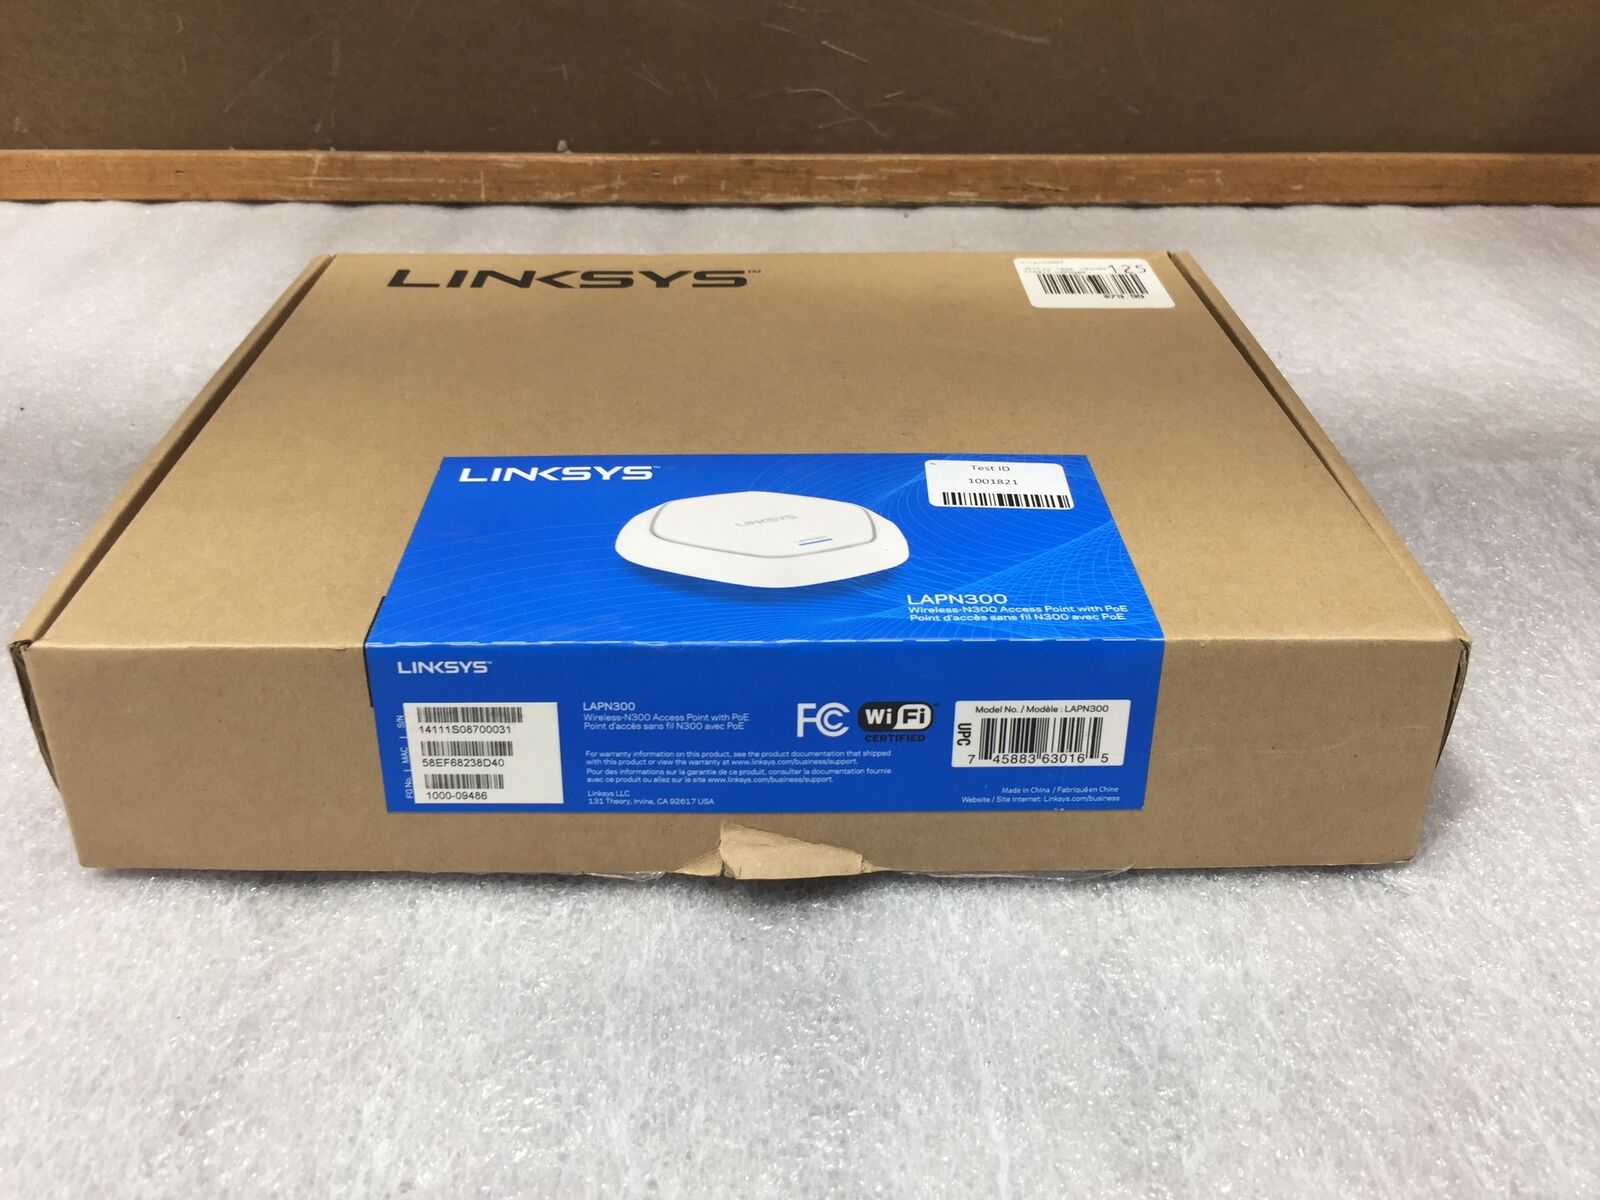 Linksys Business LAPN300 Access Point Wireless White/ Unit / Original Packaging